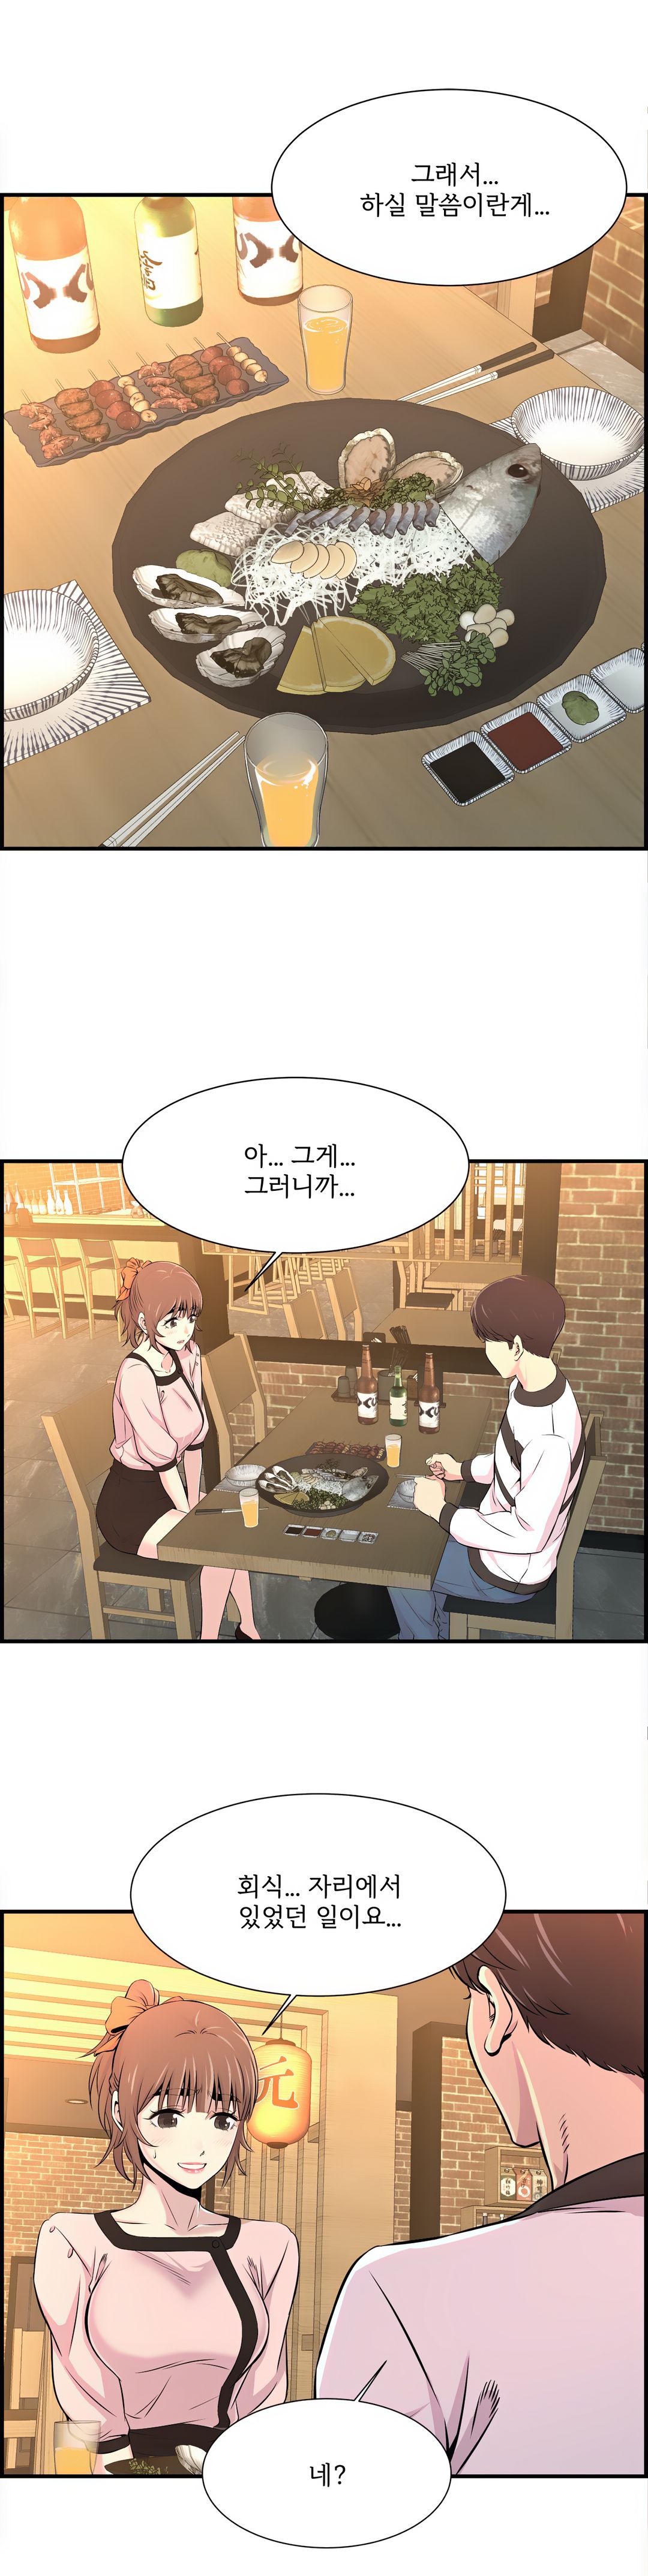 Cram School Scandal Raw - Chapter 11 Page 3